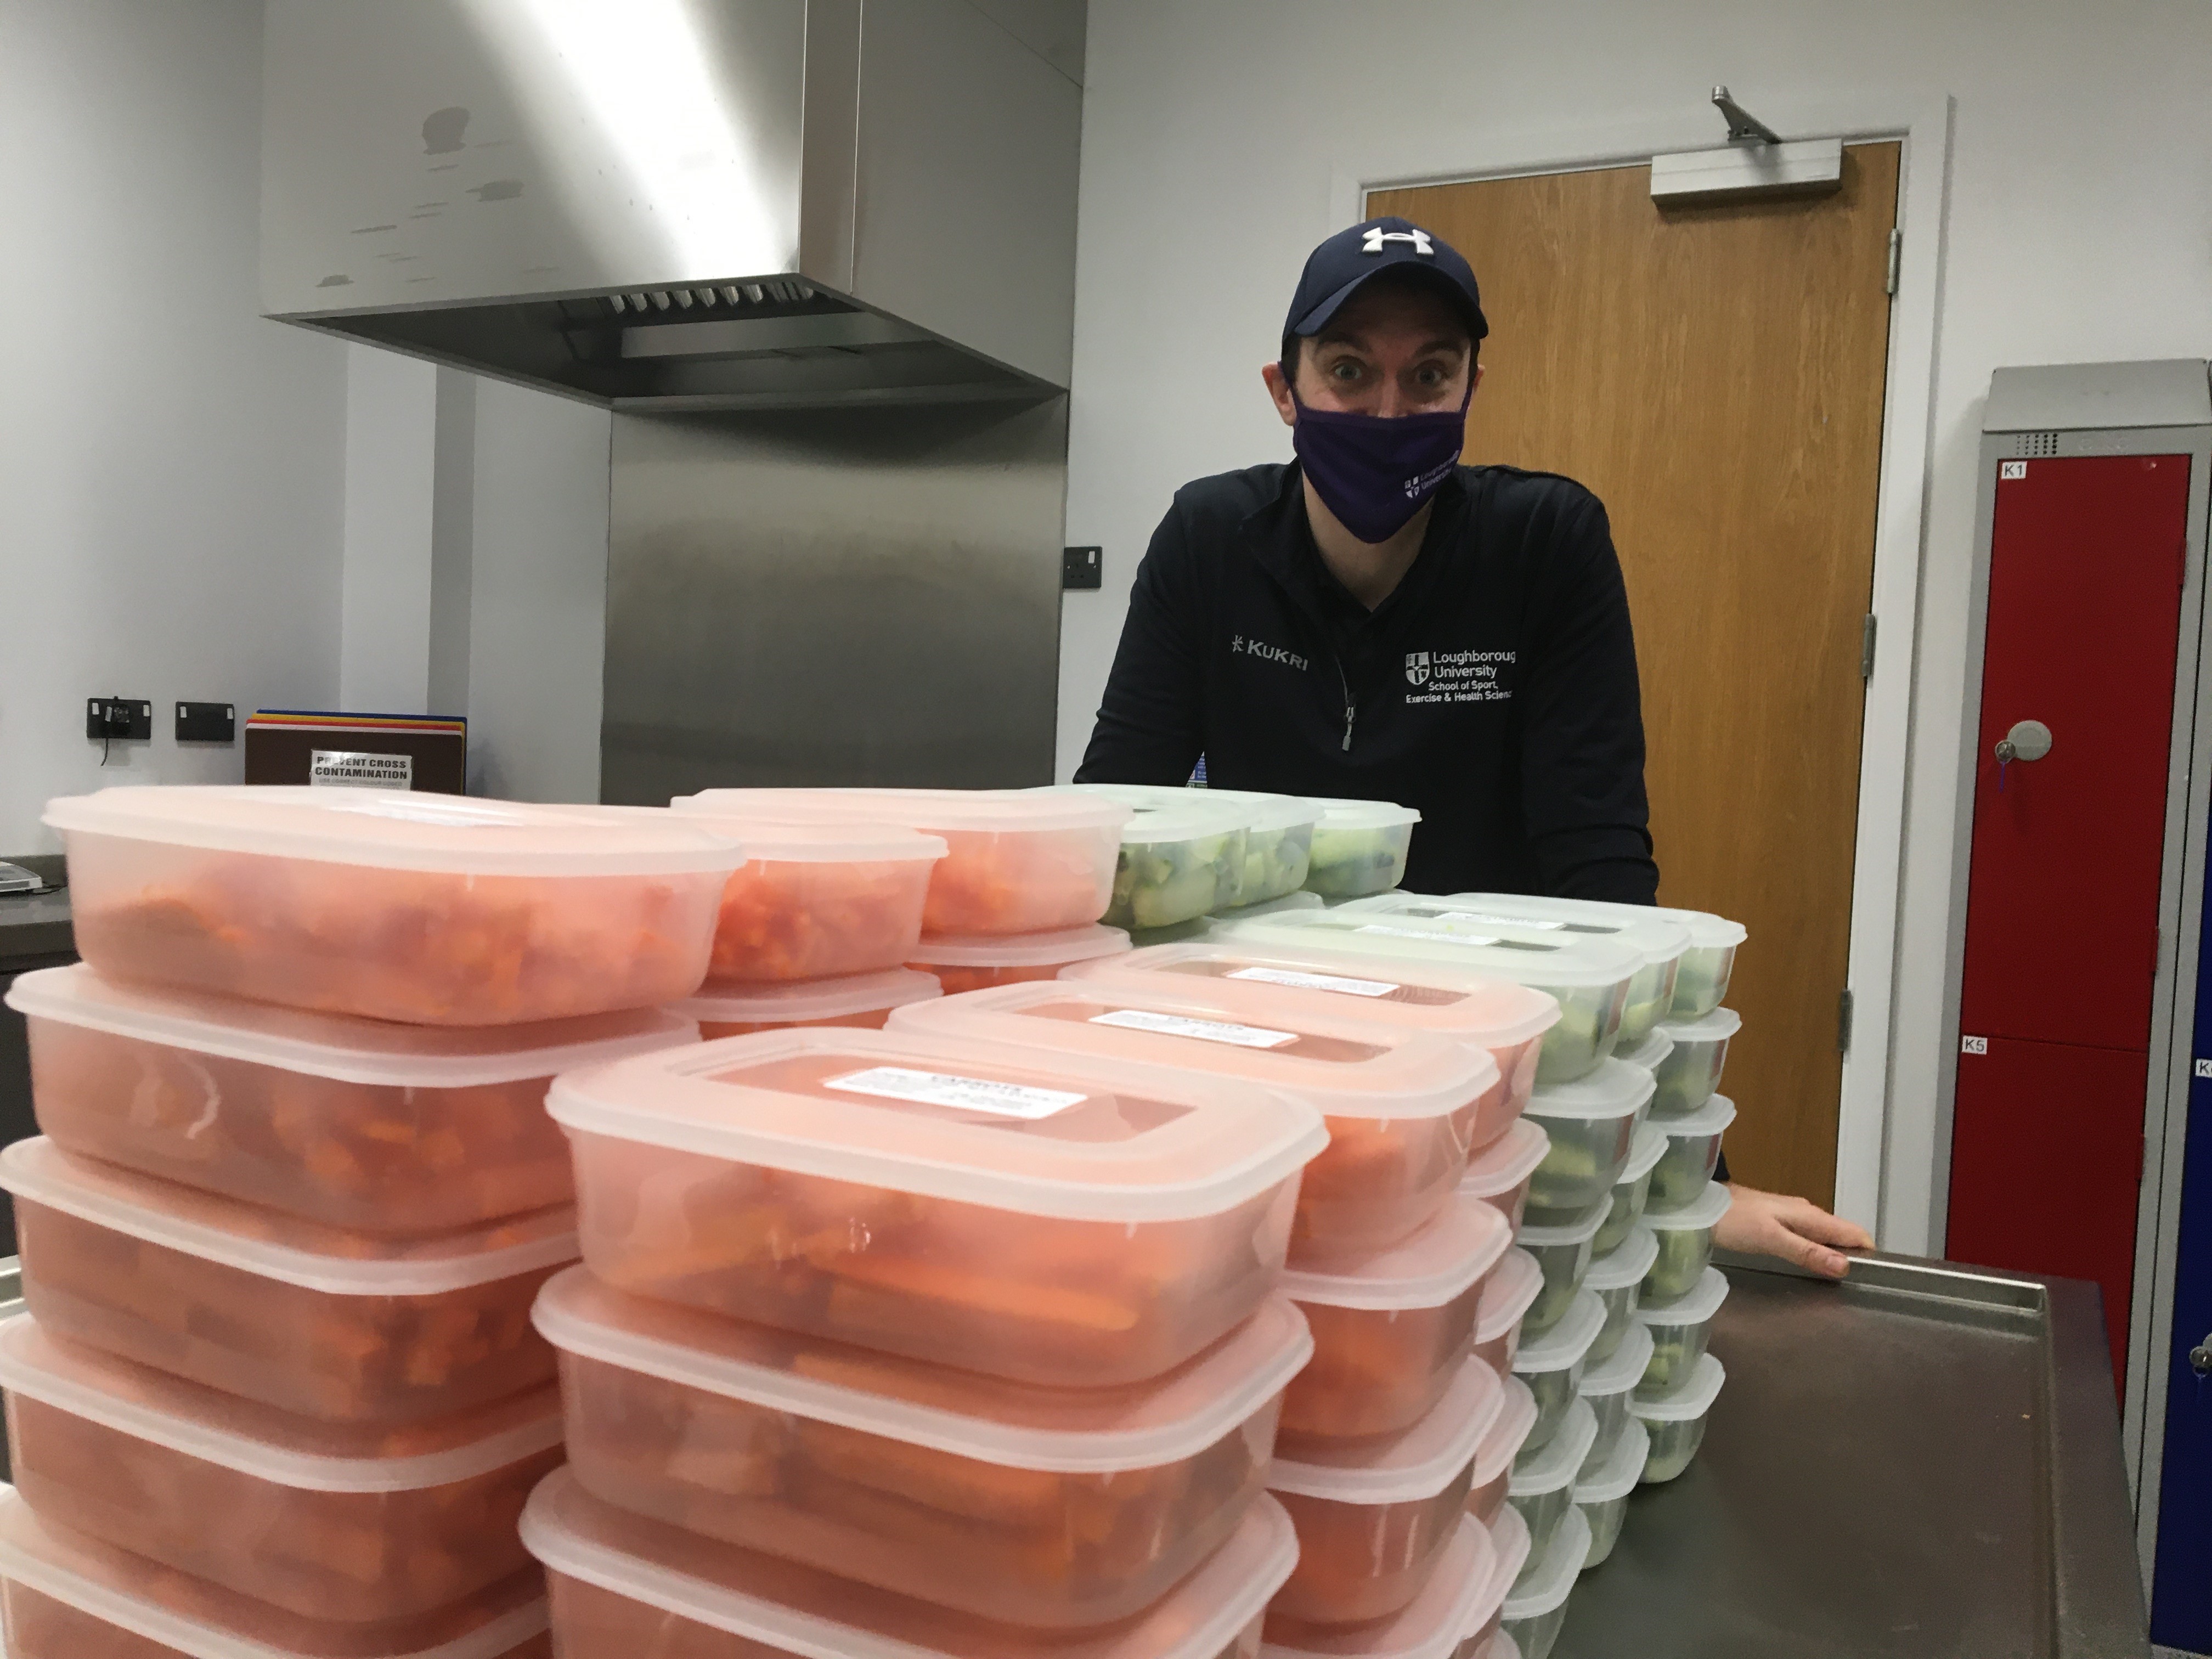 Dr Chris McLeod stands behind stacks of boxes of vegetables prepared for local preschools